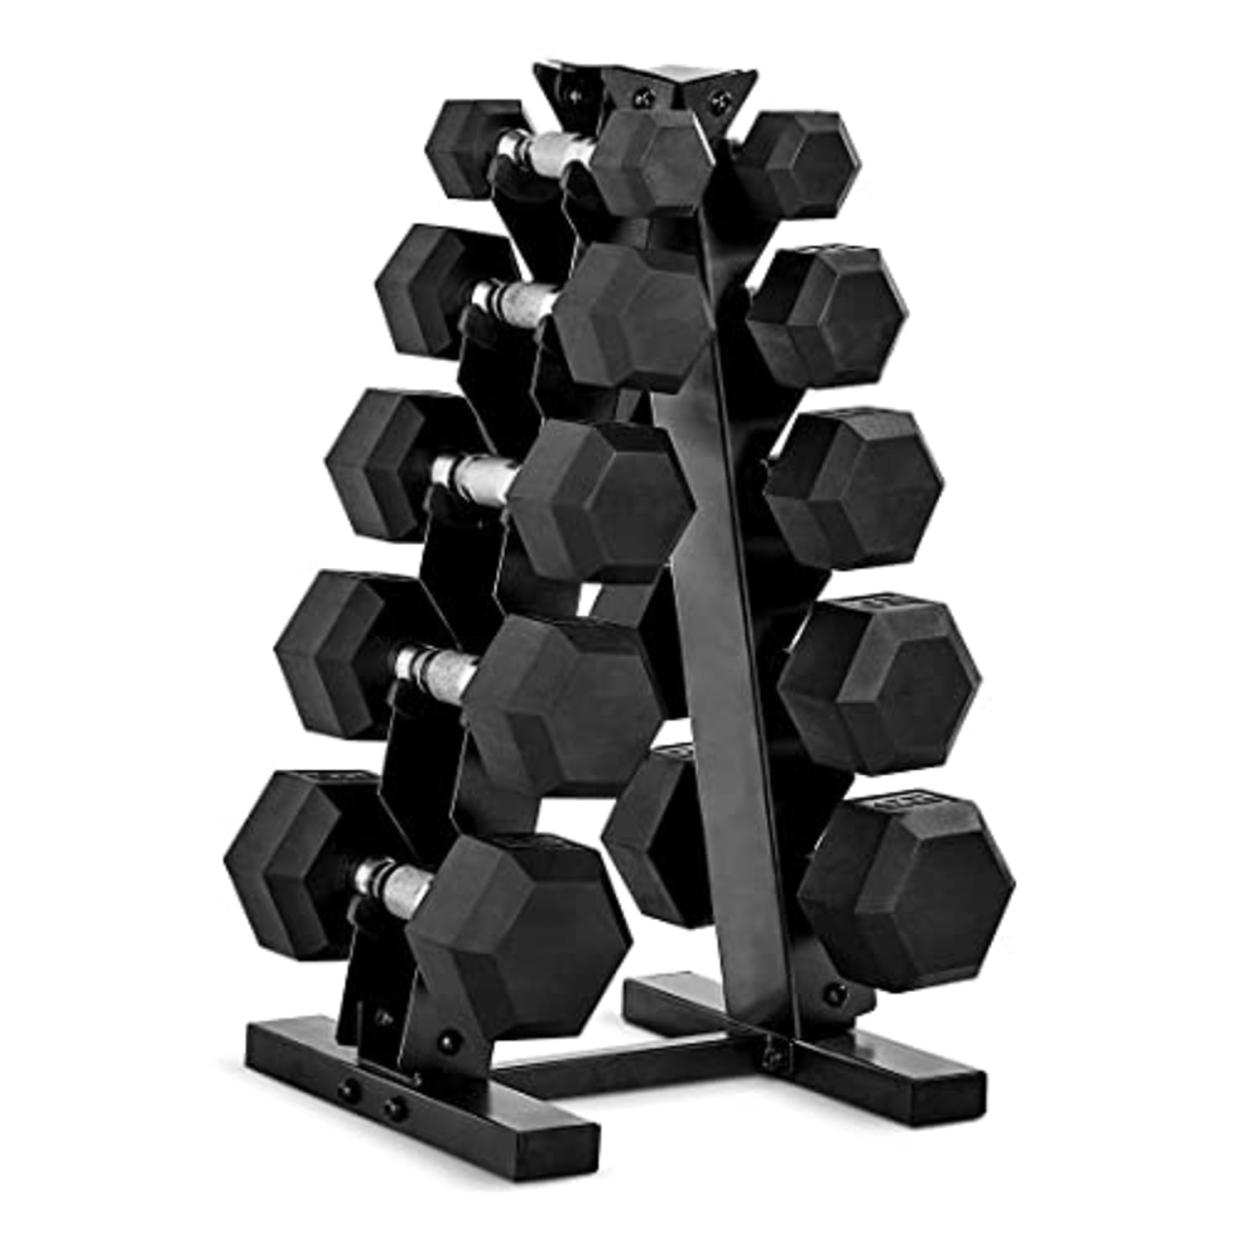 CAP Barbell 150 LB Coated Hex Dumbbell Weight Set with Vertical Rack, Black, New Edition (AMAZON)